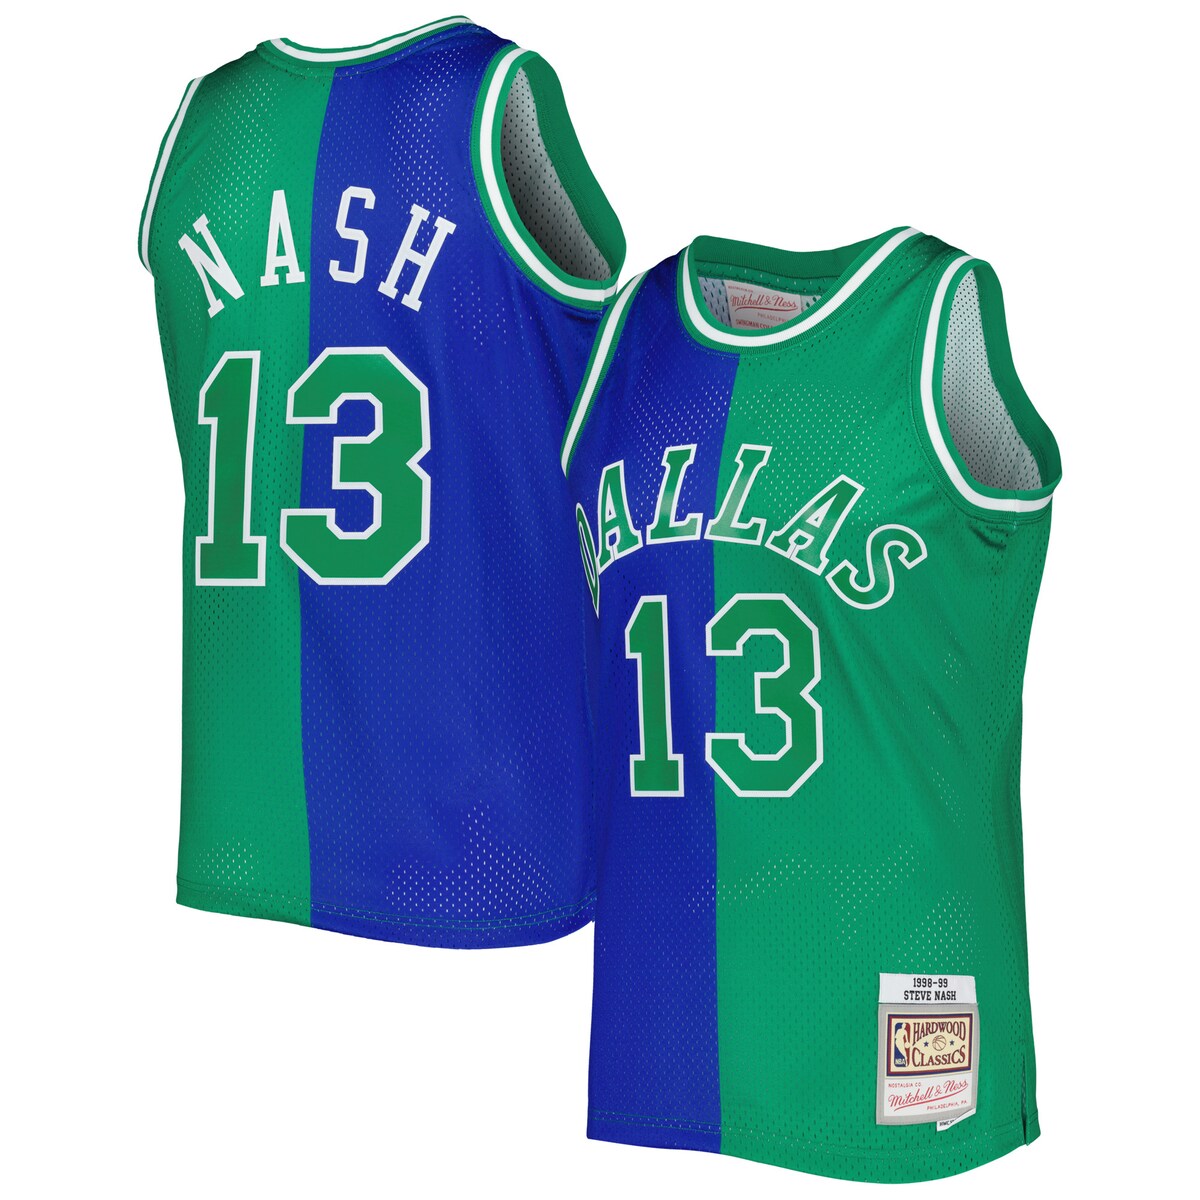 Showcase your timeless love for one of the greatest Dallas Mavericks players of all time in a trendy, distinct way with this 1998/99 Steve Nash Split Swingman jersey by Mitchell & Ness. The unique Hardwood Classics design featuring vibrant team graphics and Steve Nash details allows you to boast your fandom loud and proud. Additionally, lightweight construction and breezy mesh fabric bring comfort and breathability to your Dallas Mavericks gear.SleevelessMachine wash, line drySwingman ThrowbackOfficially licensedWoven jock tagSide splits at waist hemImportedMaterial: 100% PolyesterSublimated graphicsMesh fabricBrand: Mitchell & NessHeat-sealed fabric appliques